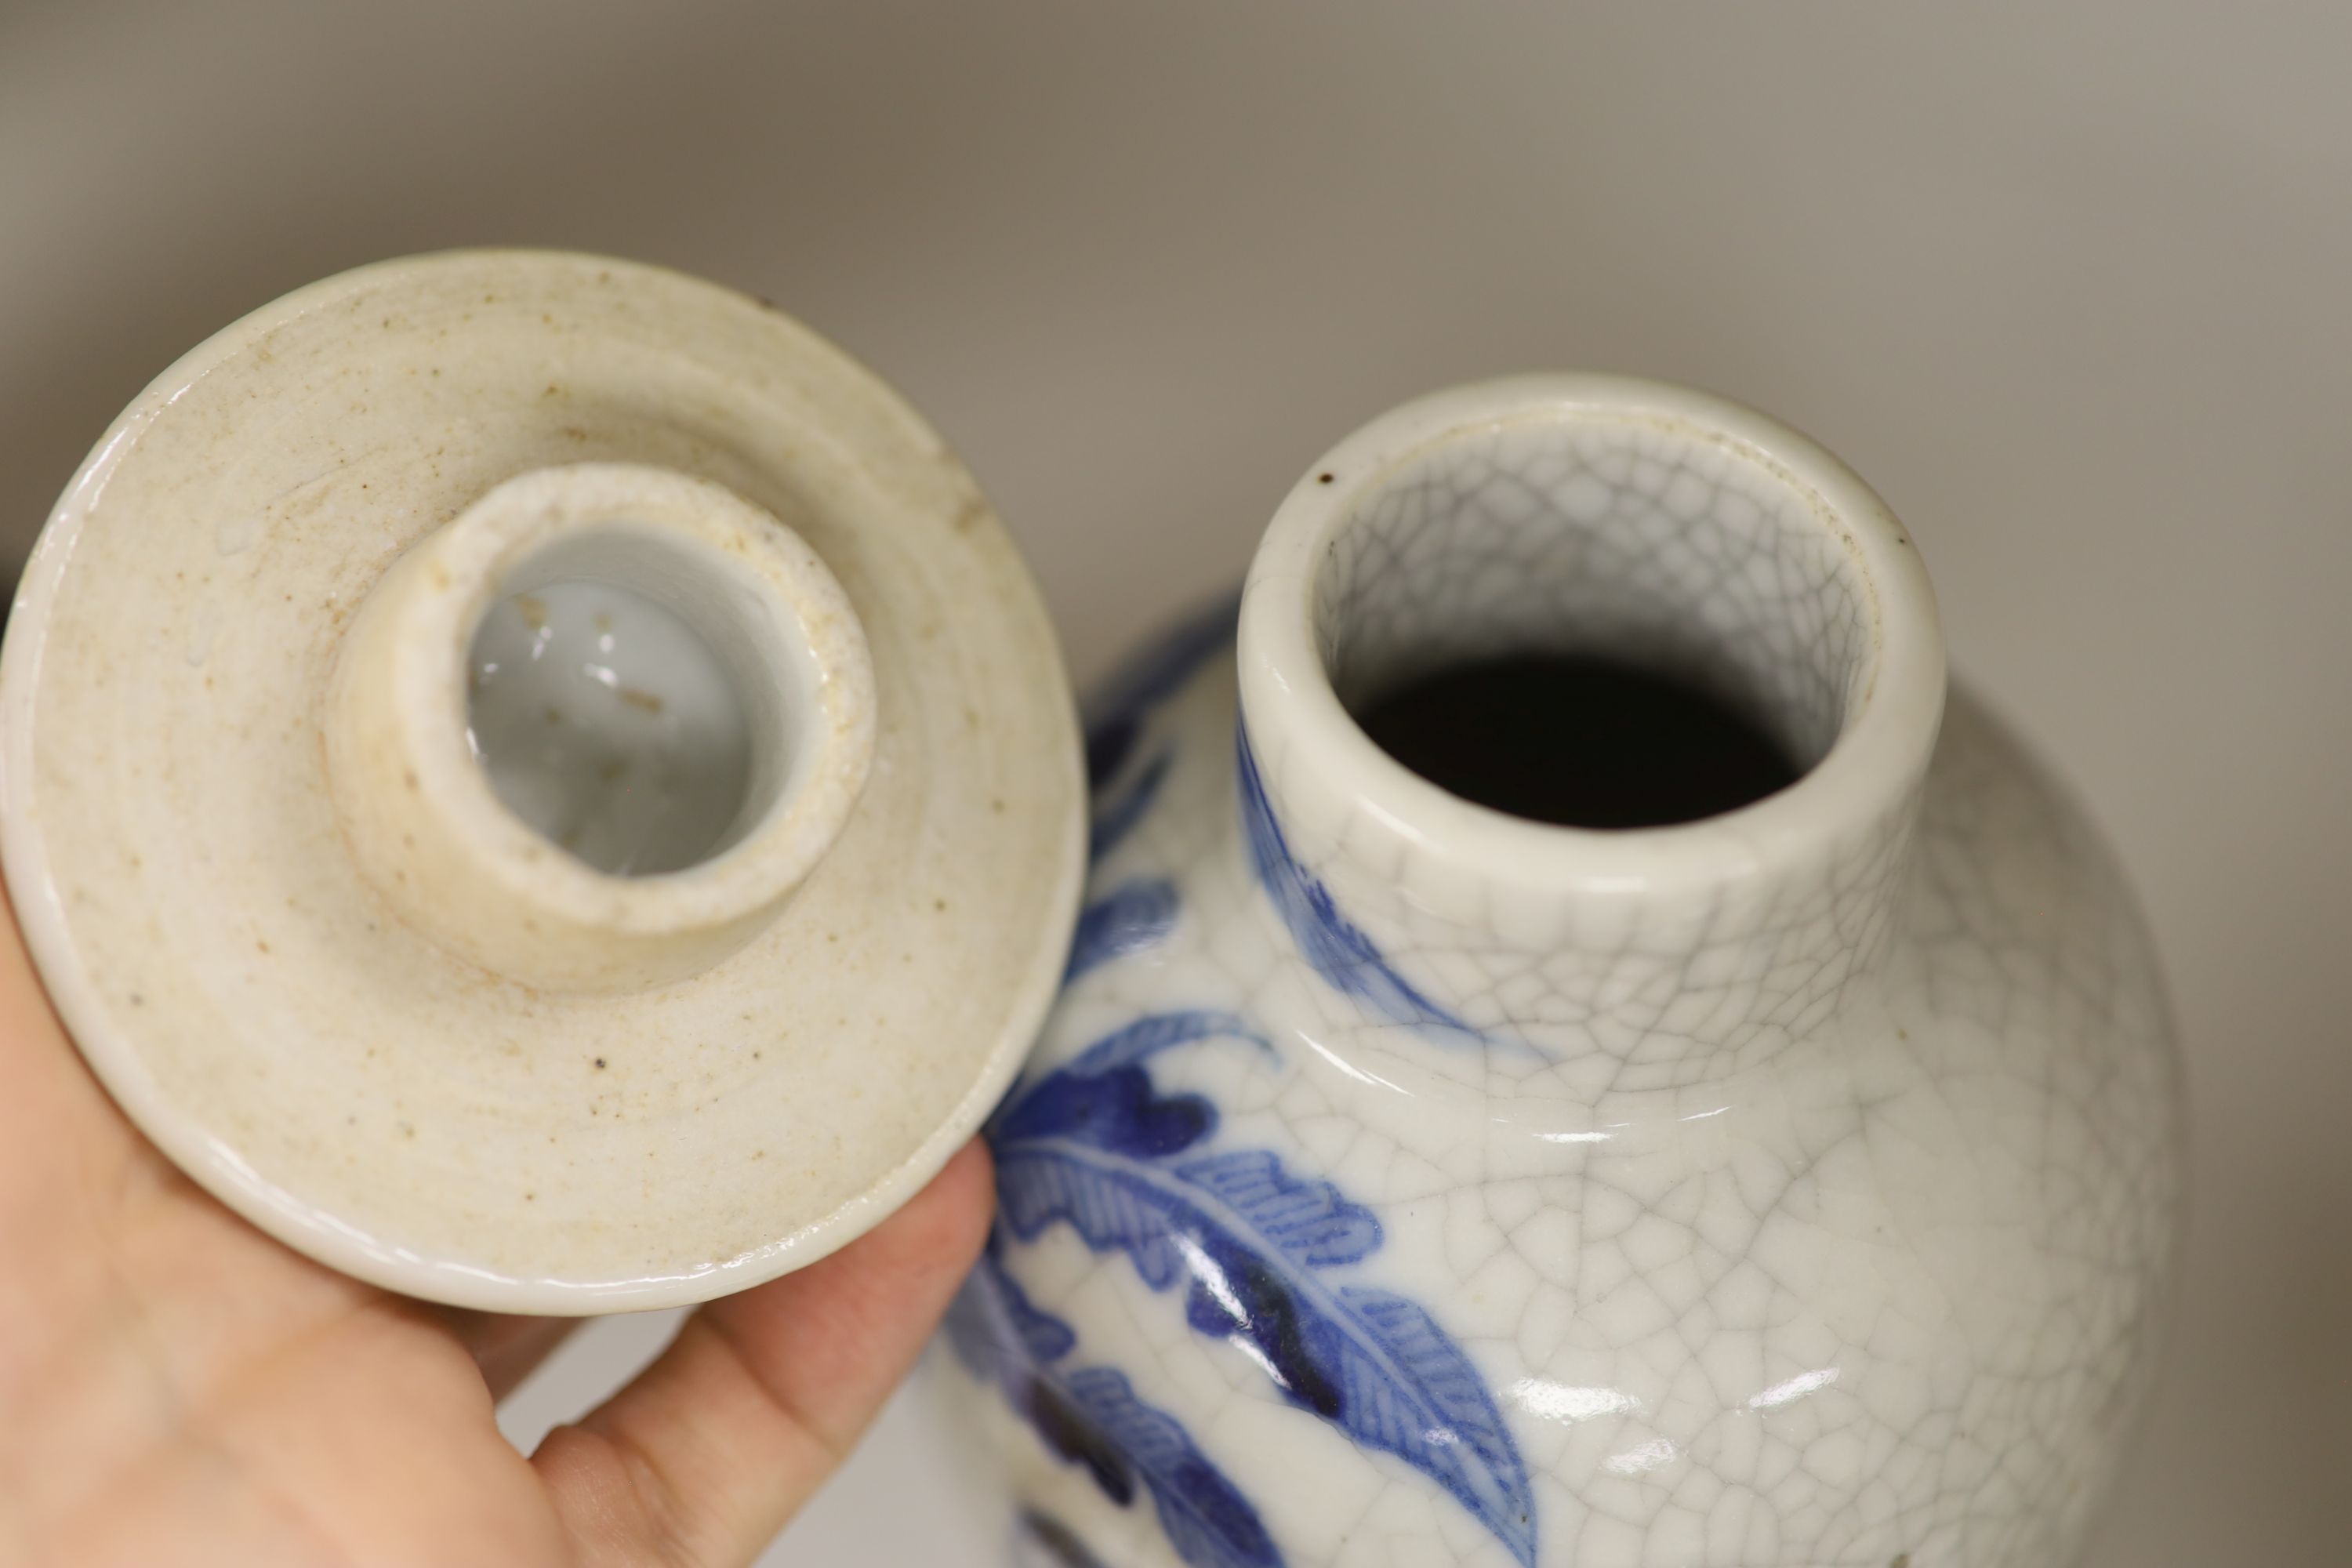 A late 19th century Chinese blue and white crackle glaze vase and cover, height 27cm